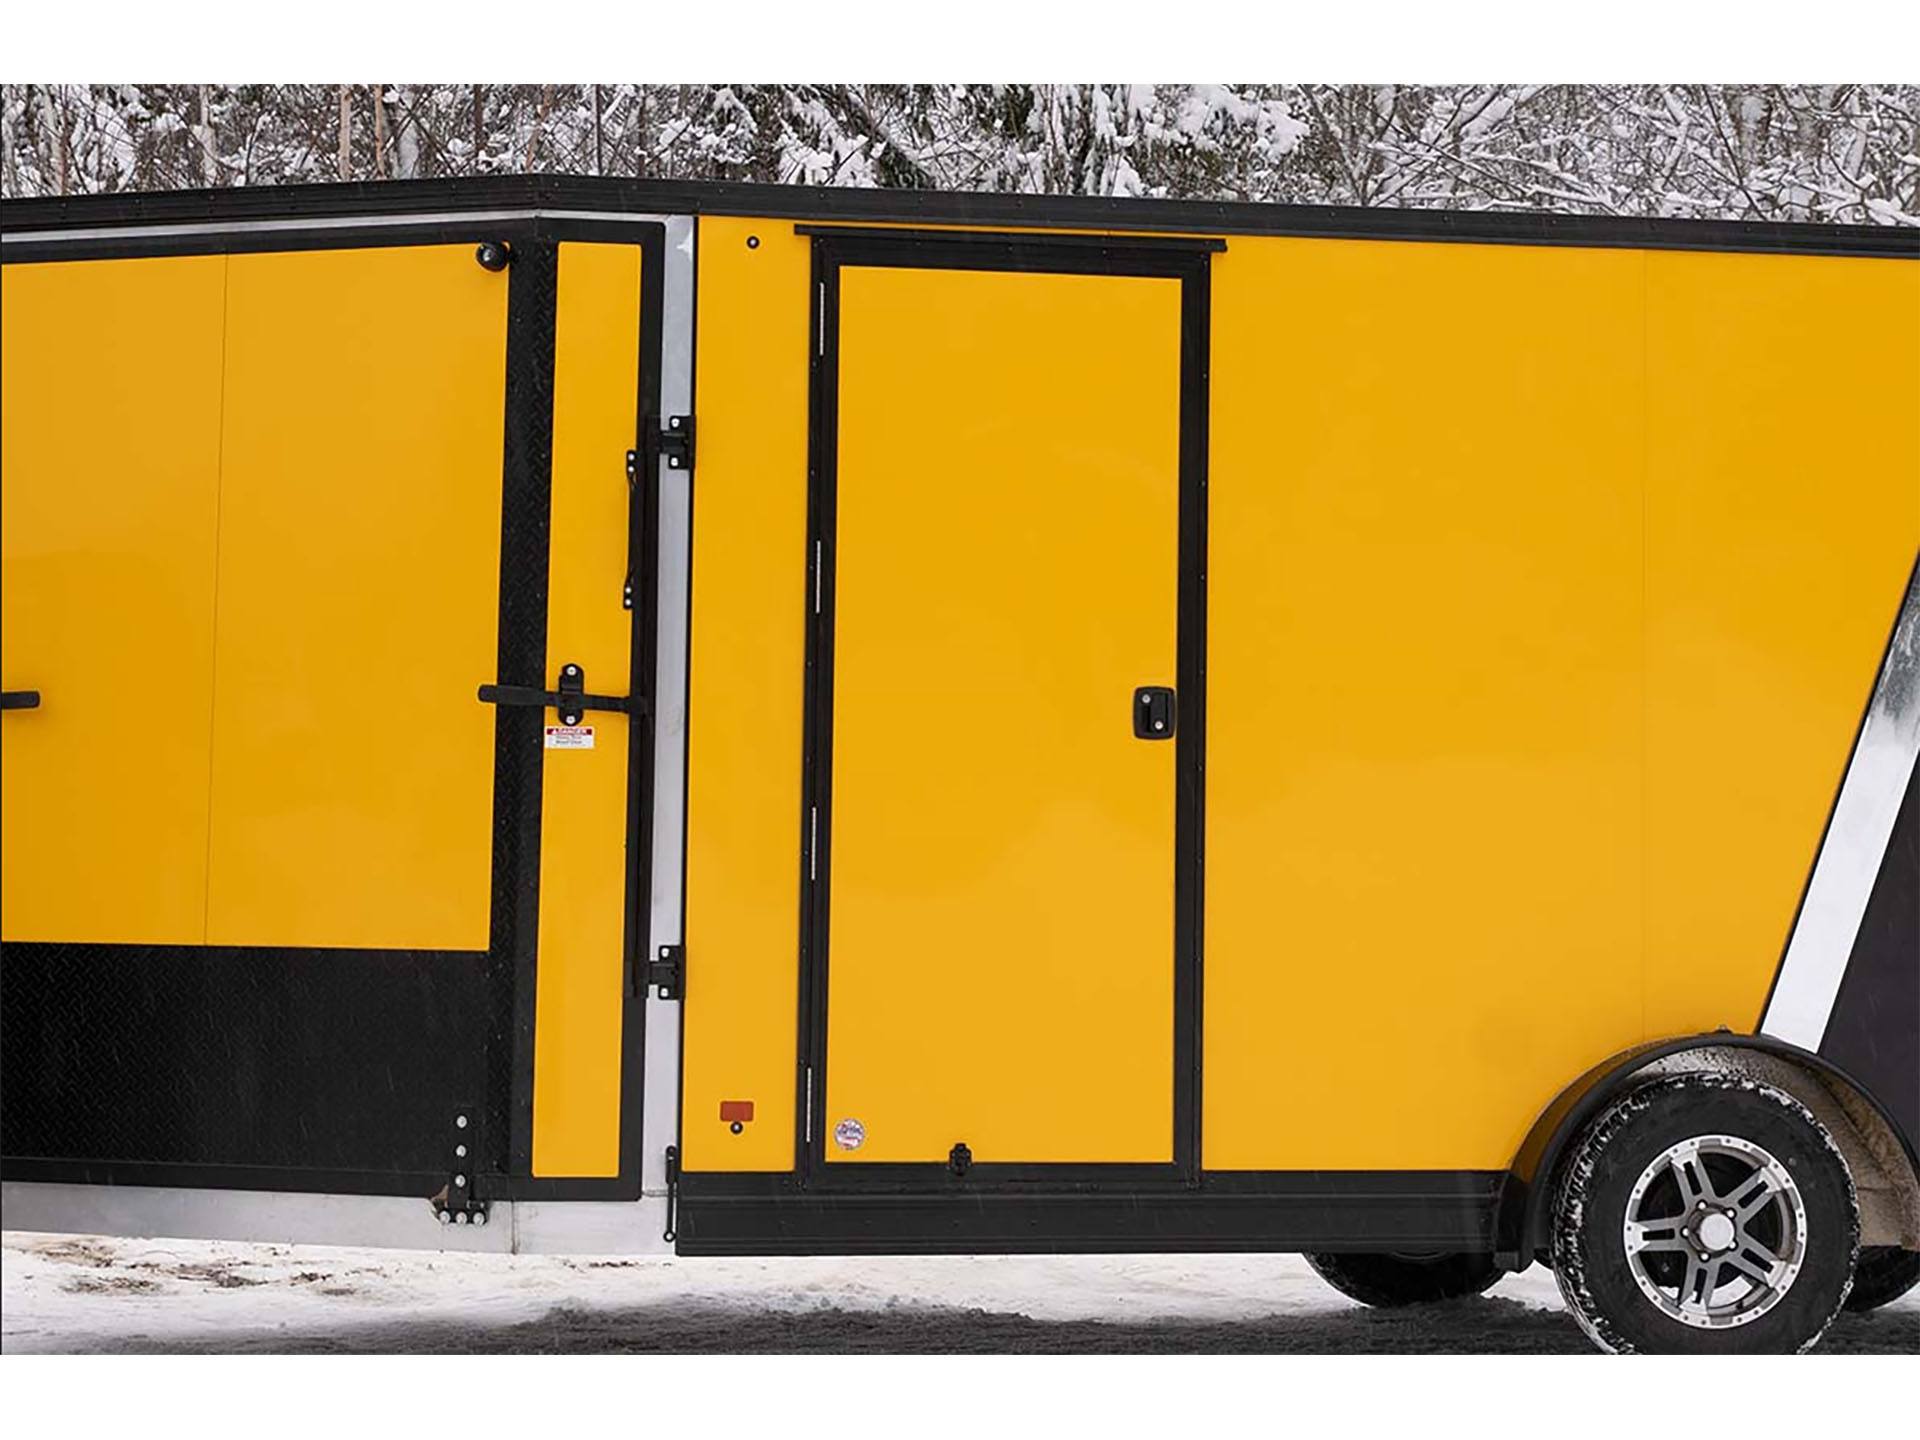 2024 Polaris Trailers Enclosed Cargo Trailers 7 ft. Wide - 12 ft. Long in Milford, New Hampshire - Photo 6